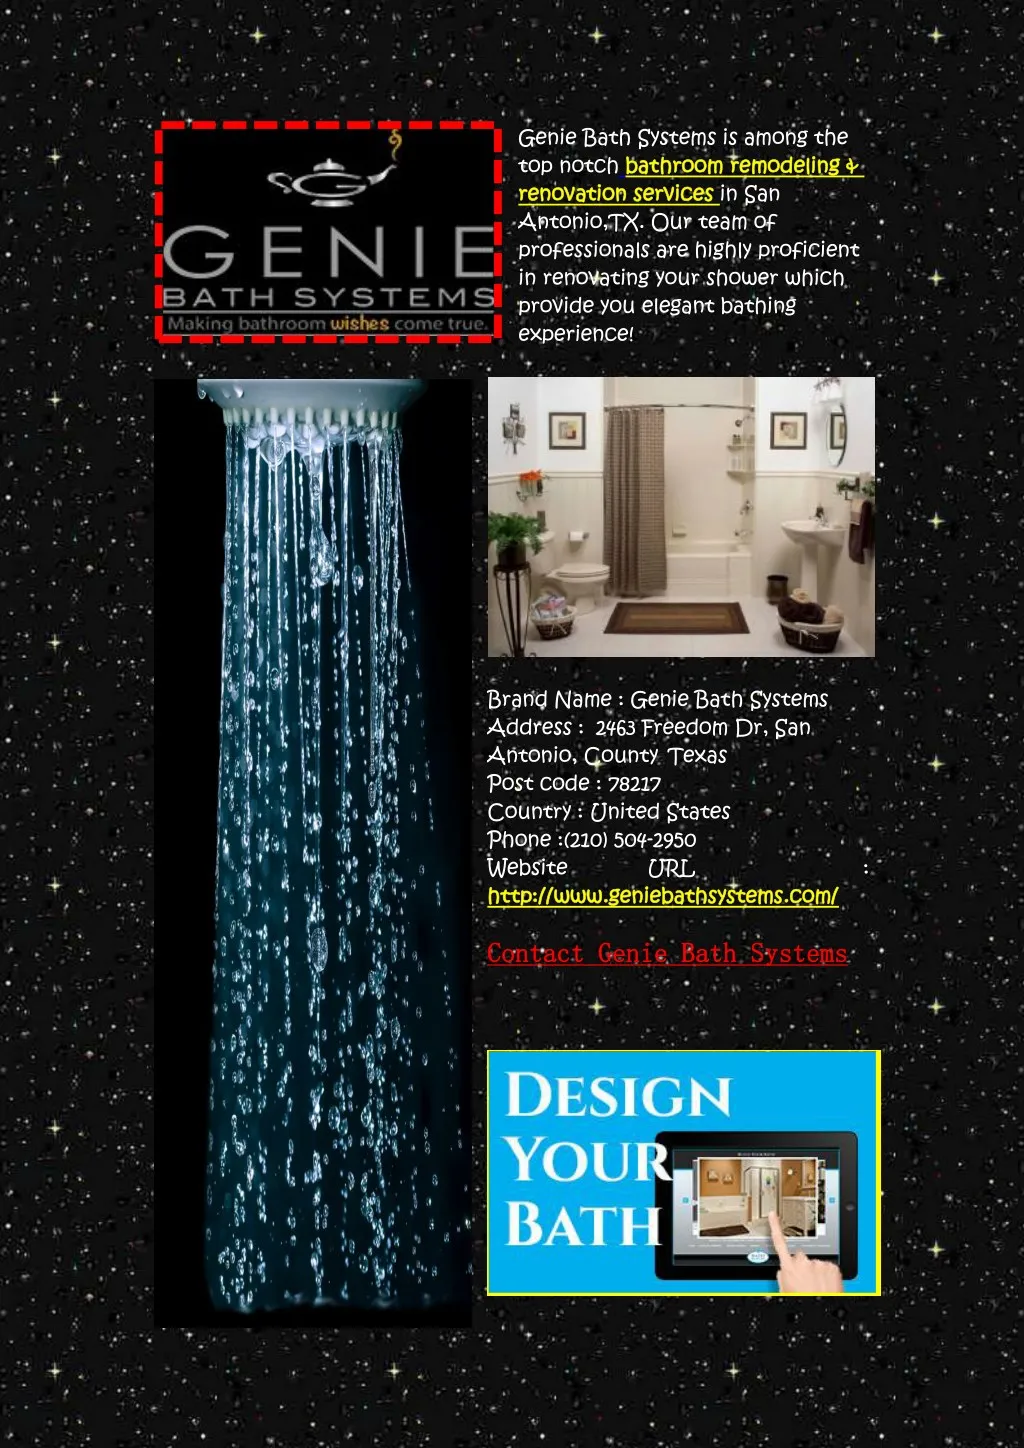 genie bath systems is among the top notch